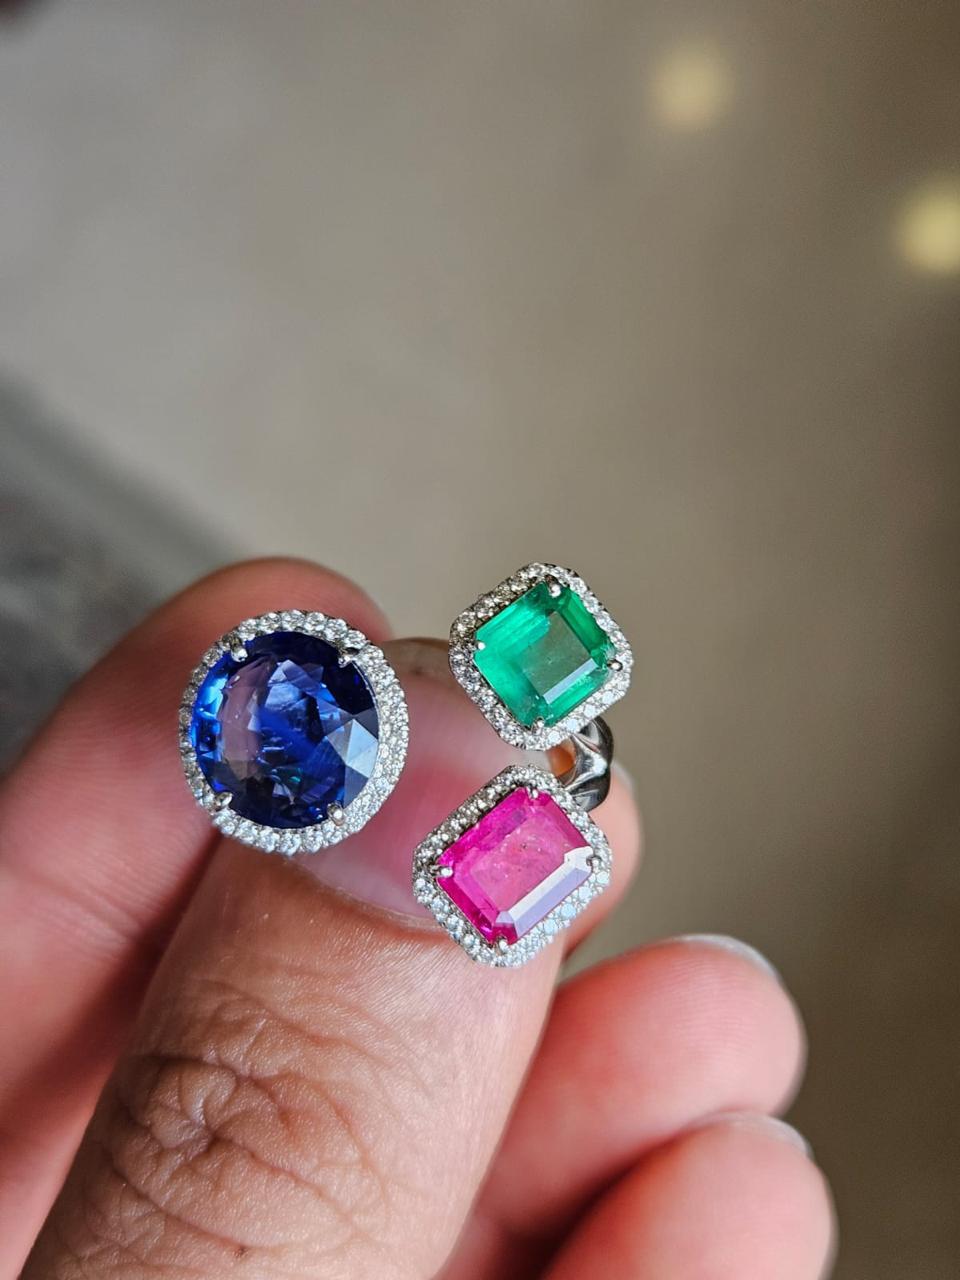 A very gorgeous and beautiful, one of a kind, Emerald, Ruby & Blue Sapphire Three Stone/ Cocktail Ring set in 18K White Gold & Diamonds. The weight of the round Blue Sapphire is 3.71 carats. The Blue Sapphire is of Ceylon (Sri Lanka) origin. The